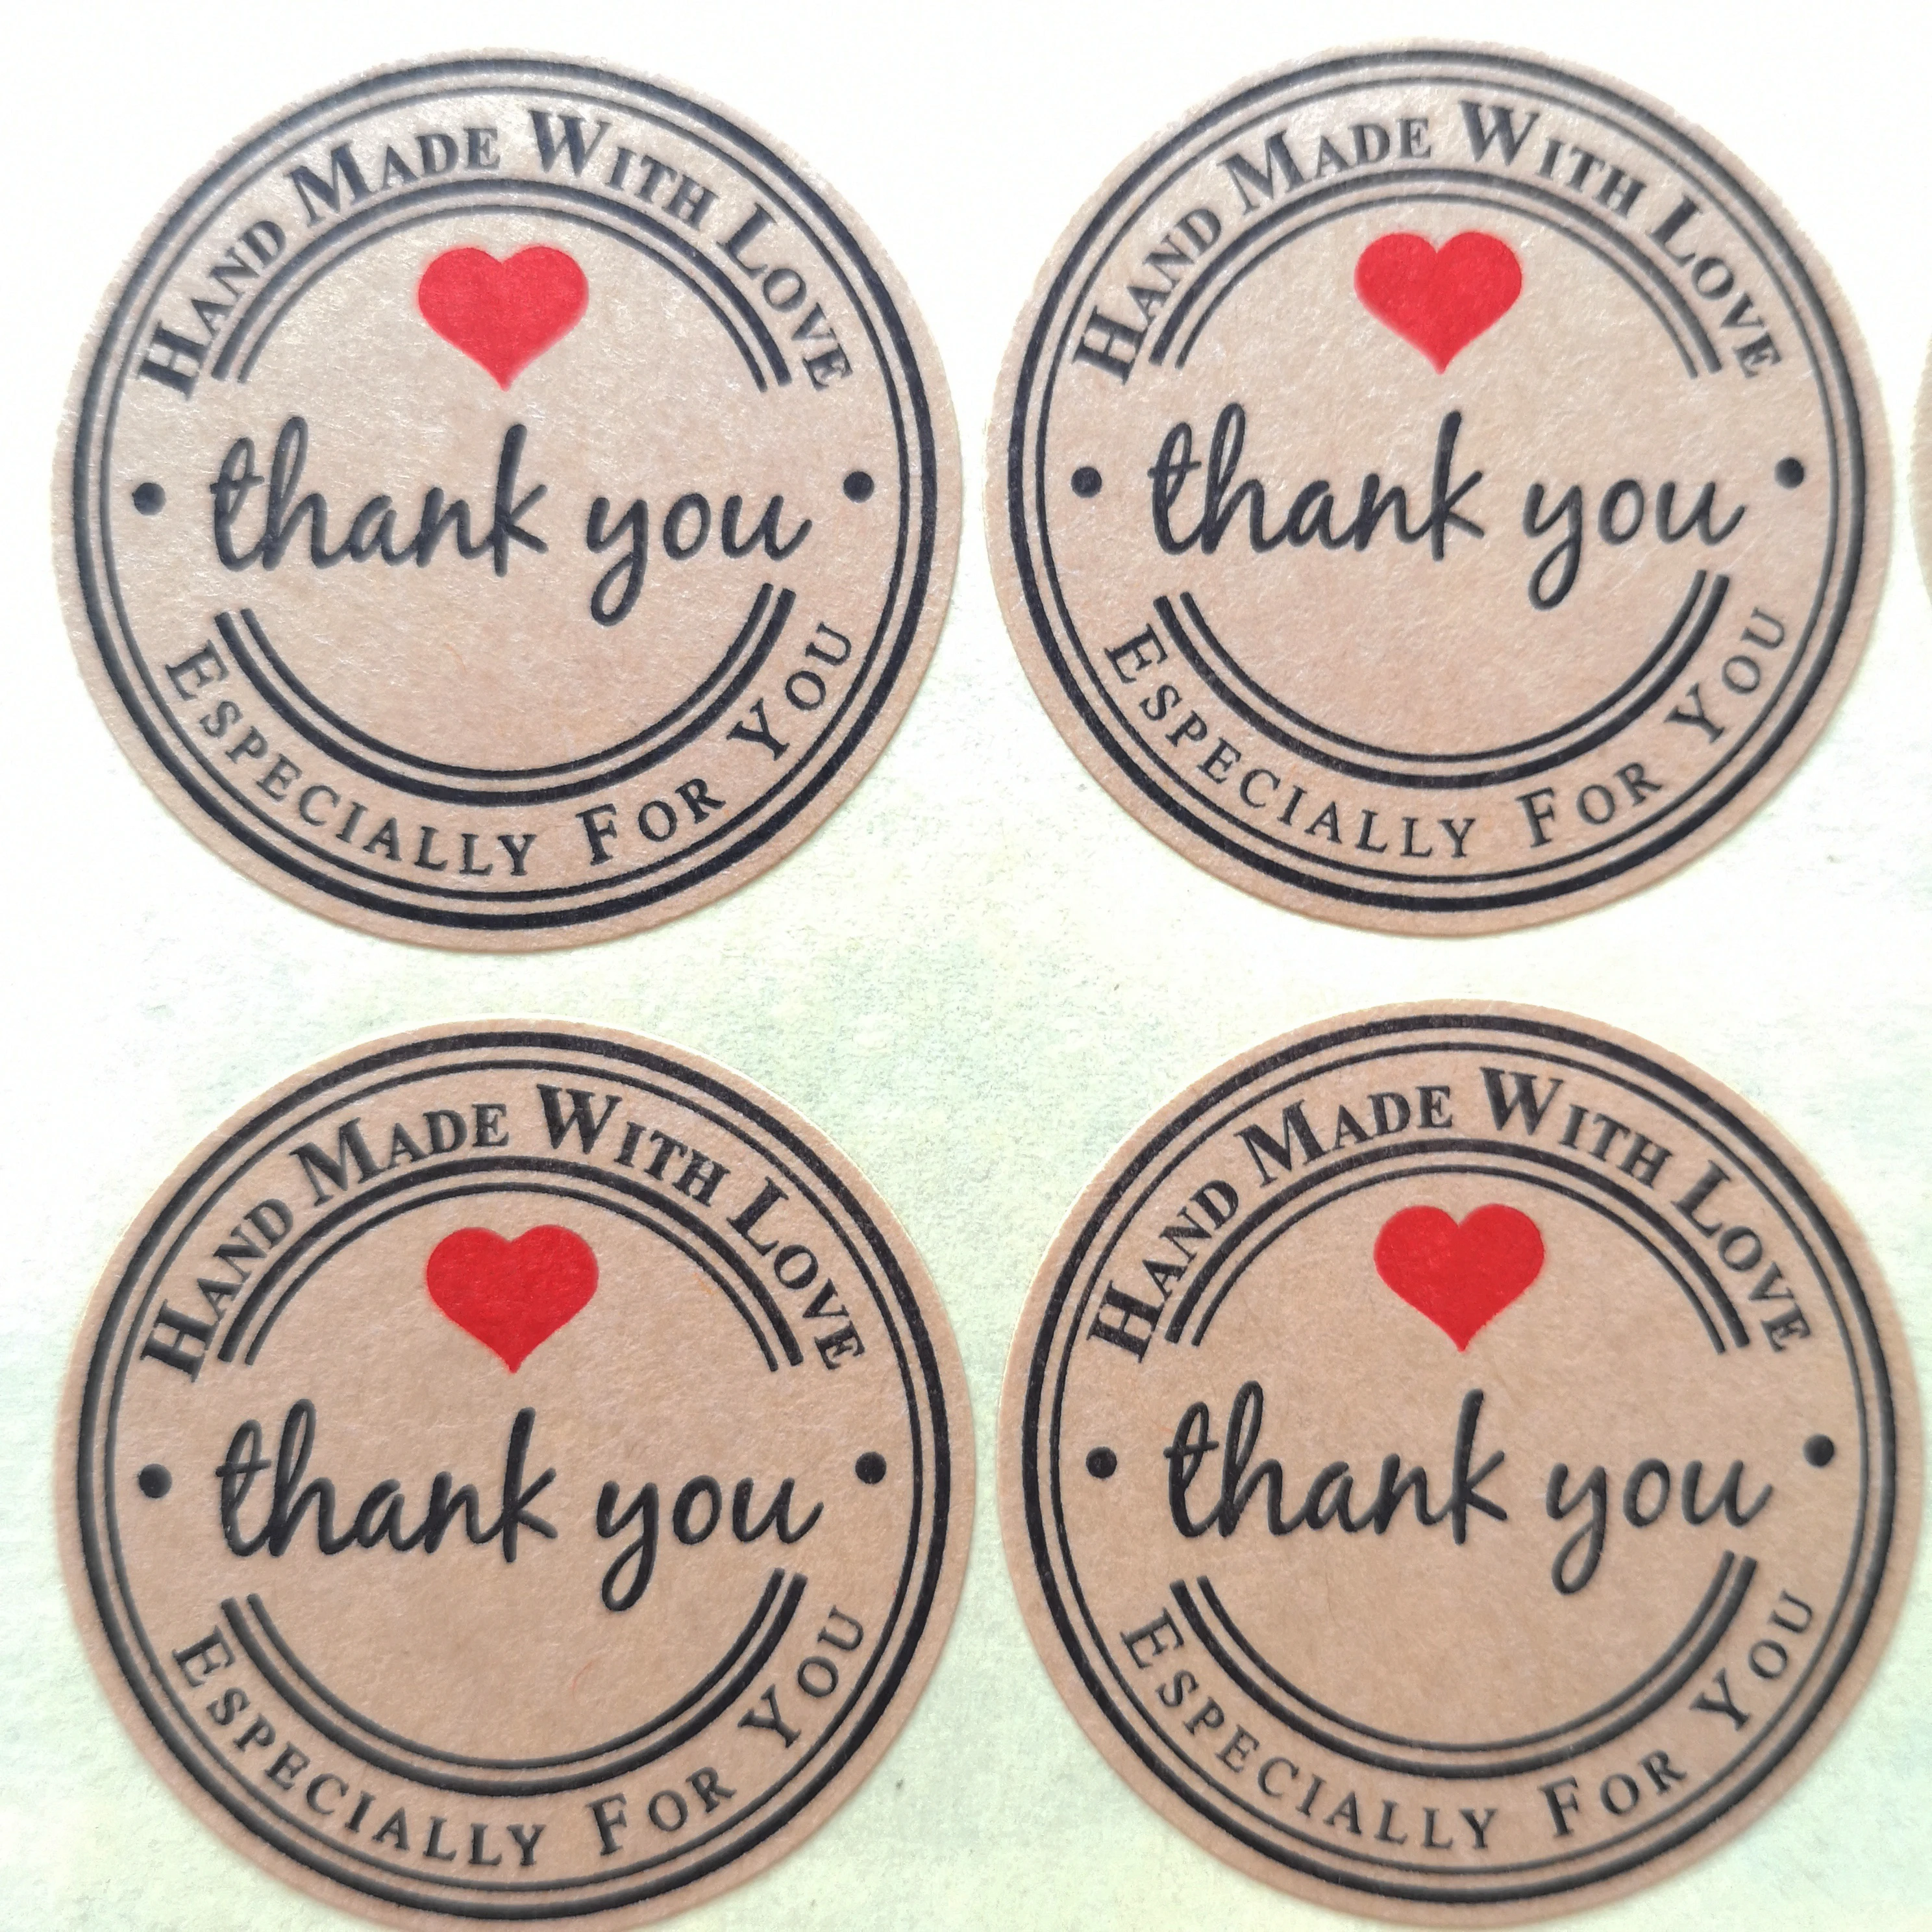 3600 stickers/lot 38mm round LOVE THANK YOU Self-adhesive craft paper sealing label sticker, Item No.TK20